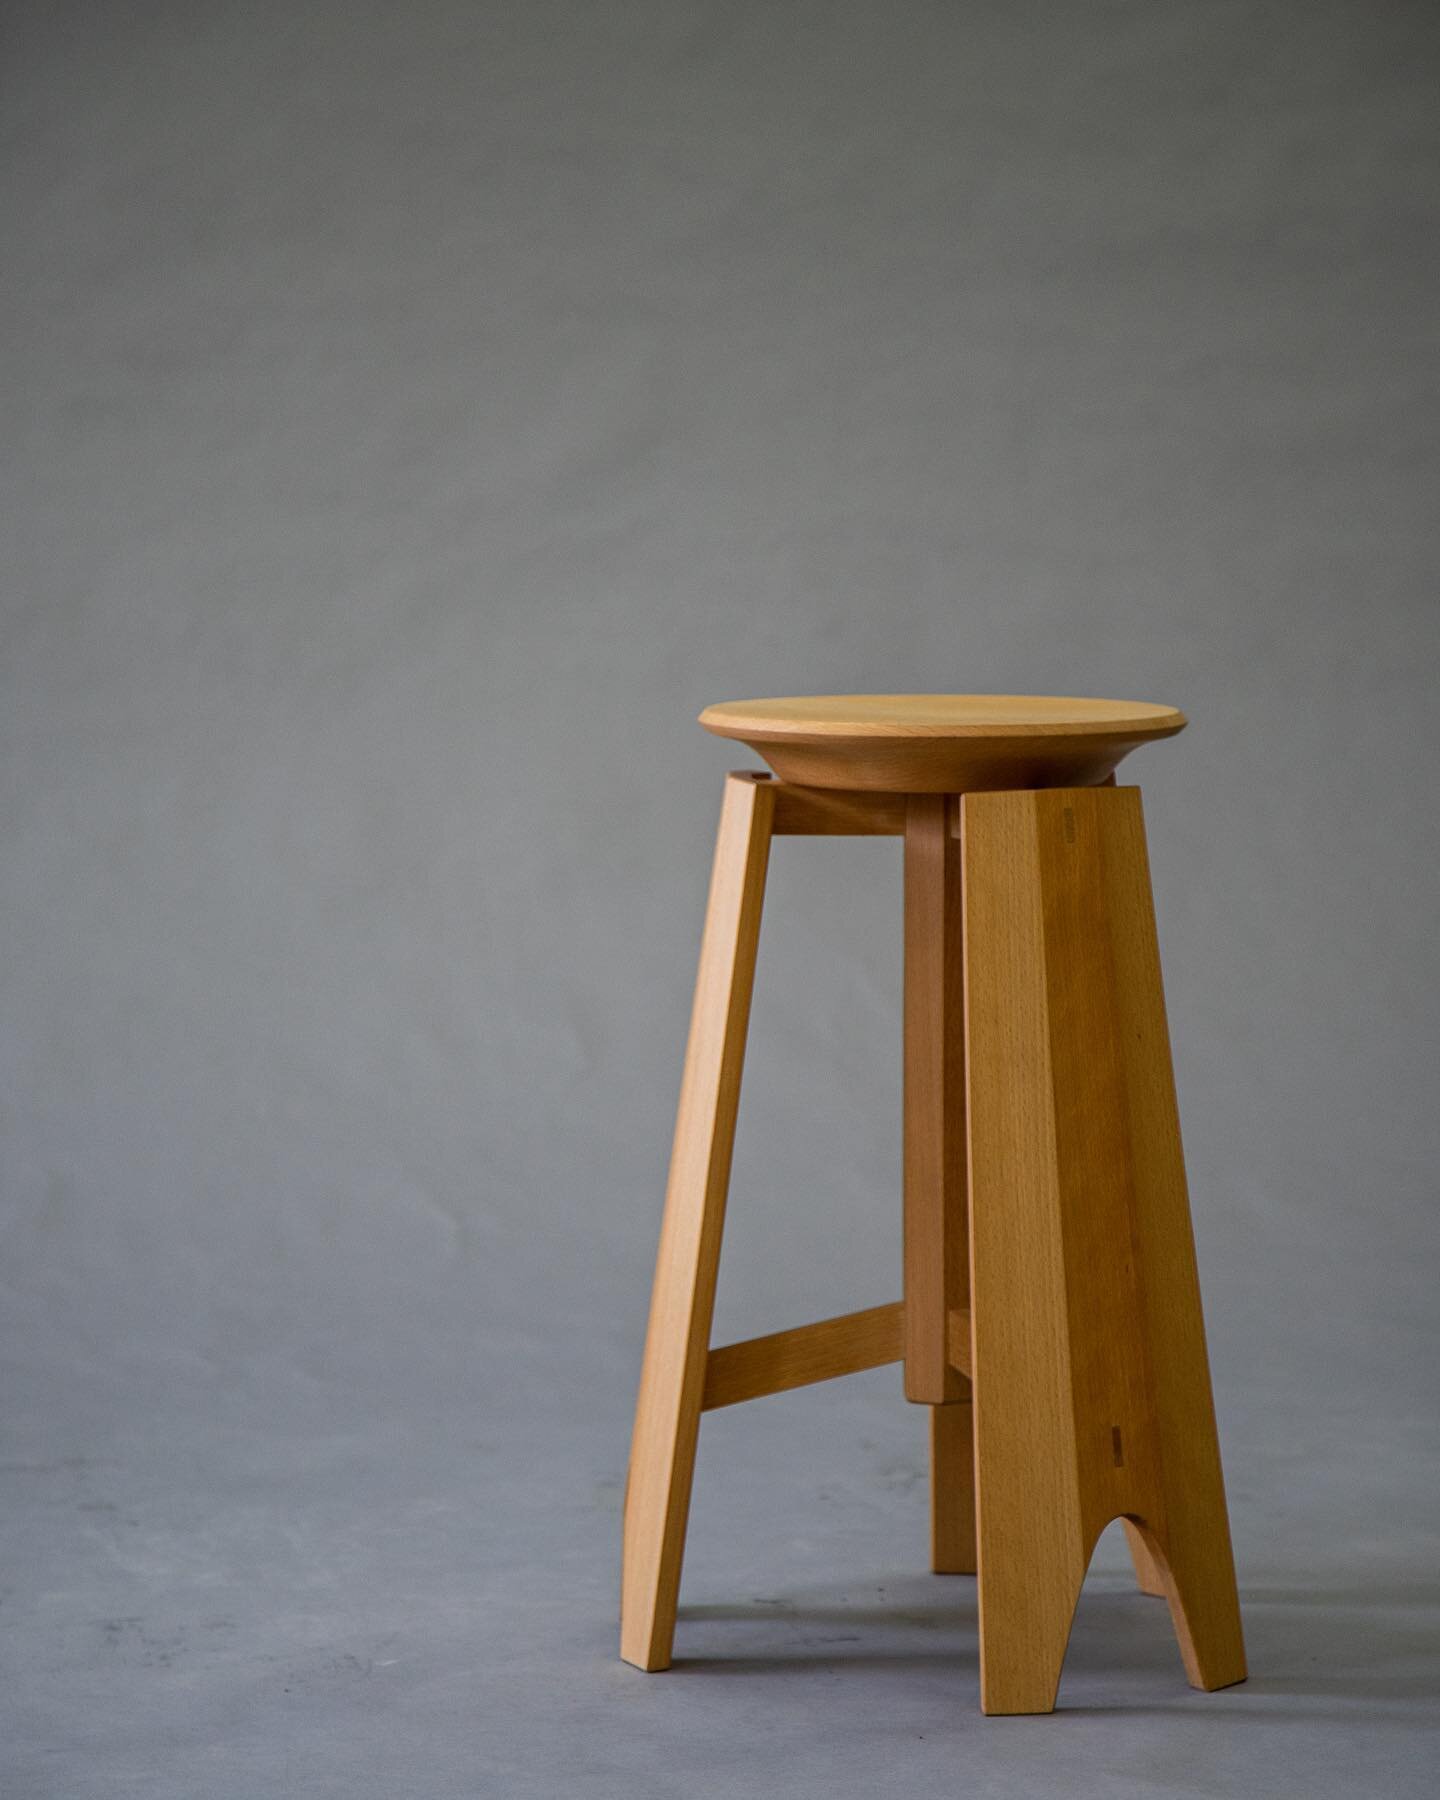 Spatial Stool
.
Existing between elevation and grounding the stool elevates the interactor from a direct line of contact to the ground. By displacing the central pillar into three panels and then bisecting each panel in two separate legs the interact